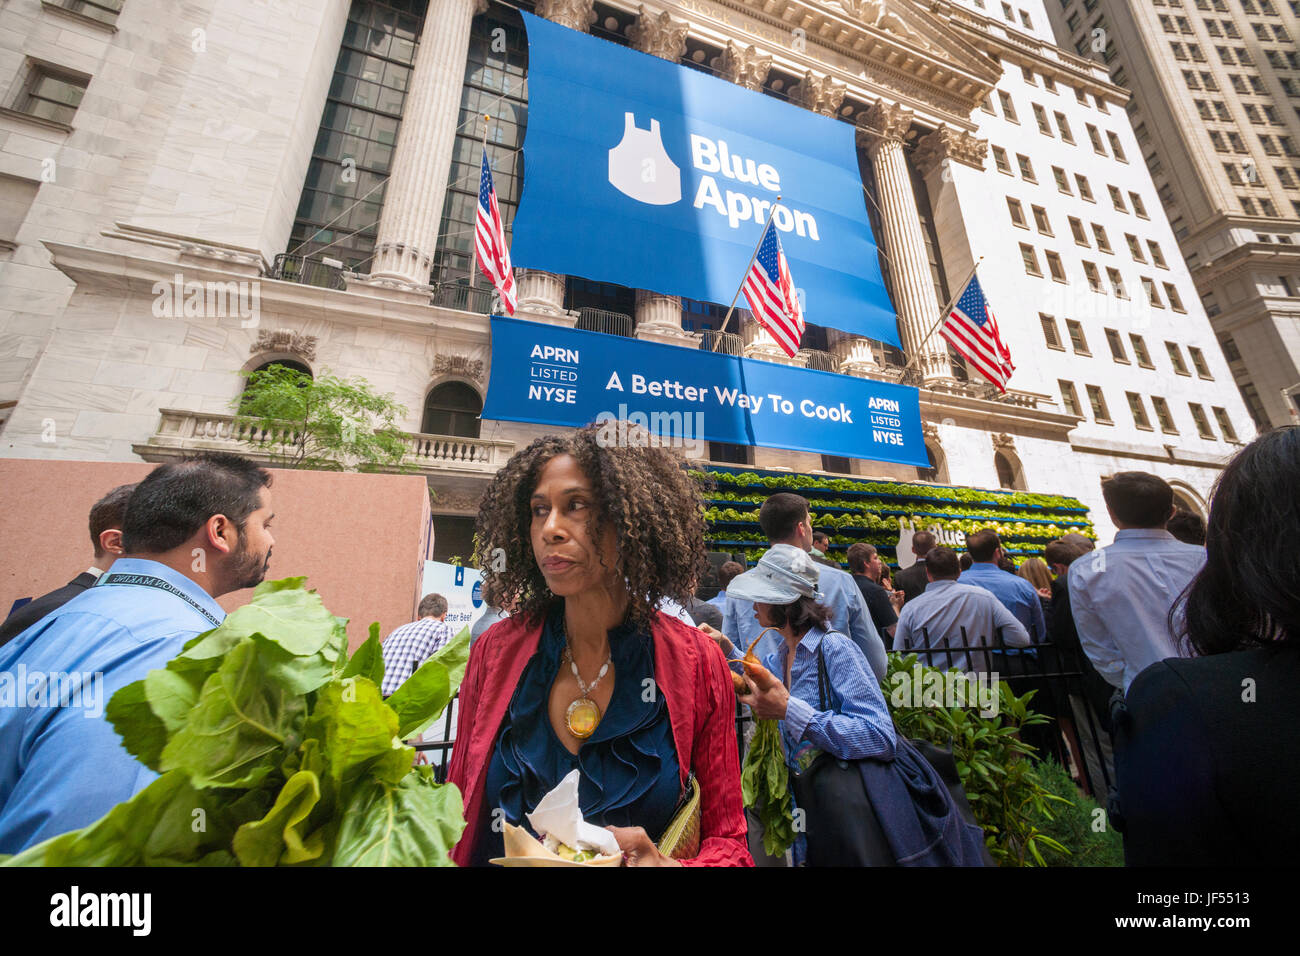 New York, USA. 29th June, 2017. Broad Street in front of the New York Stock Exchange is agog with activity during the ceremony for the initial public offering of Blue Apron Holdings, a meal-kit delivery service, on Thursday, June 29, 2017. Blue Apron Holdings Inc. reduced the price of its initial public offering because of the possible impact of the Amazon-Whole Foods Market acquisition. Blue Apron is one of several meal-kit delivery services but the first to have an IPO. ( © Richard B. Levine) Credit: Richard Levine/Alamy Live News Stock Photo